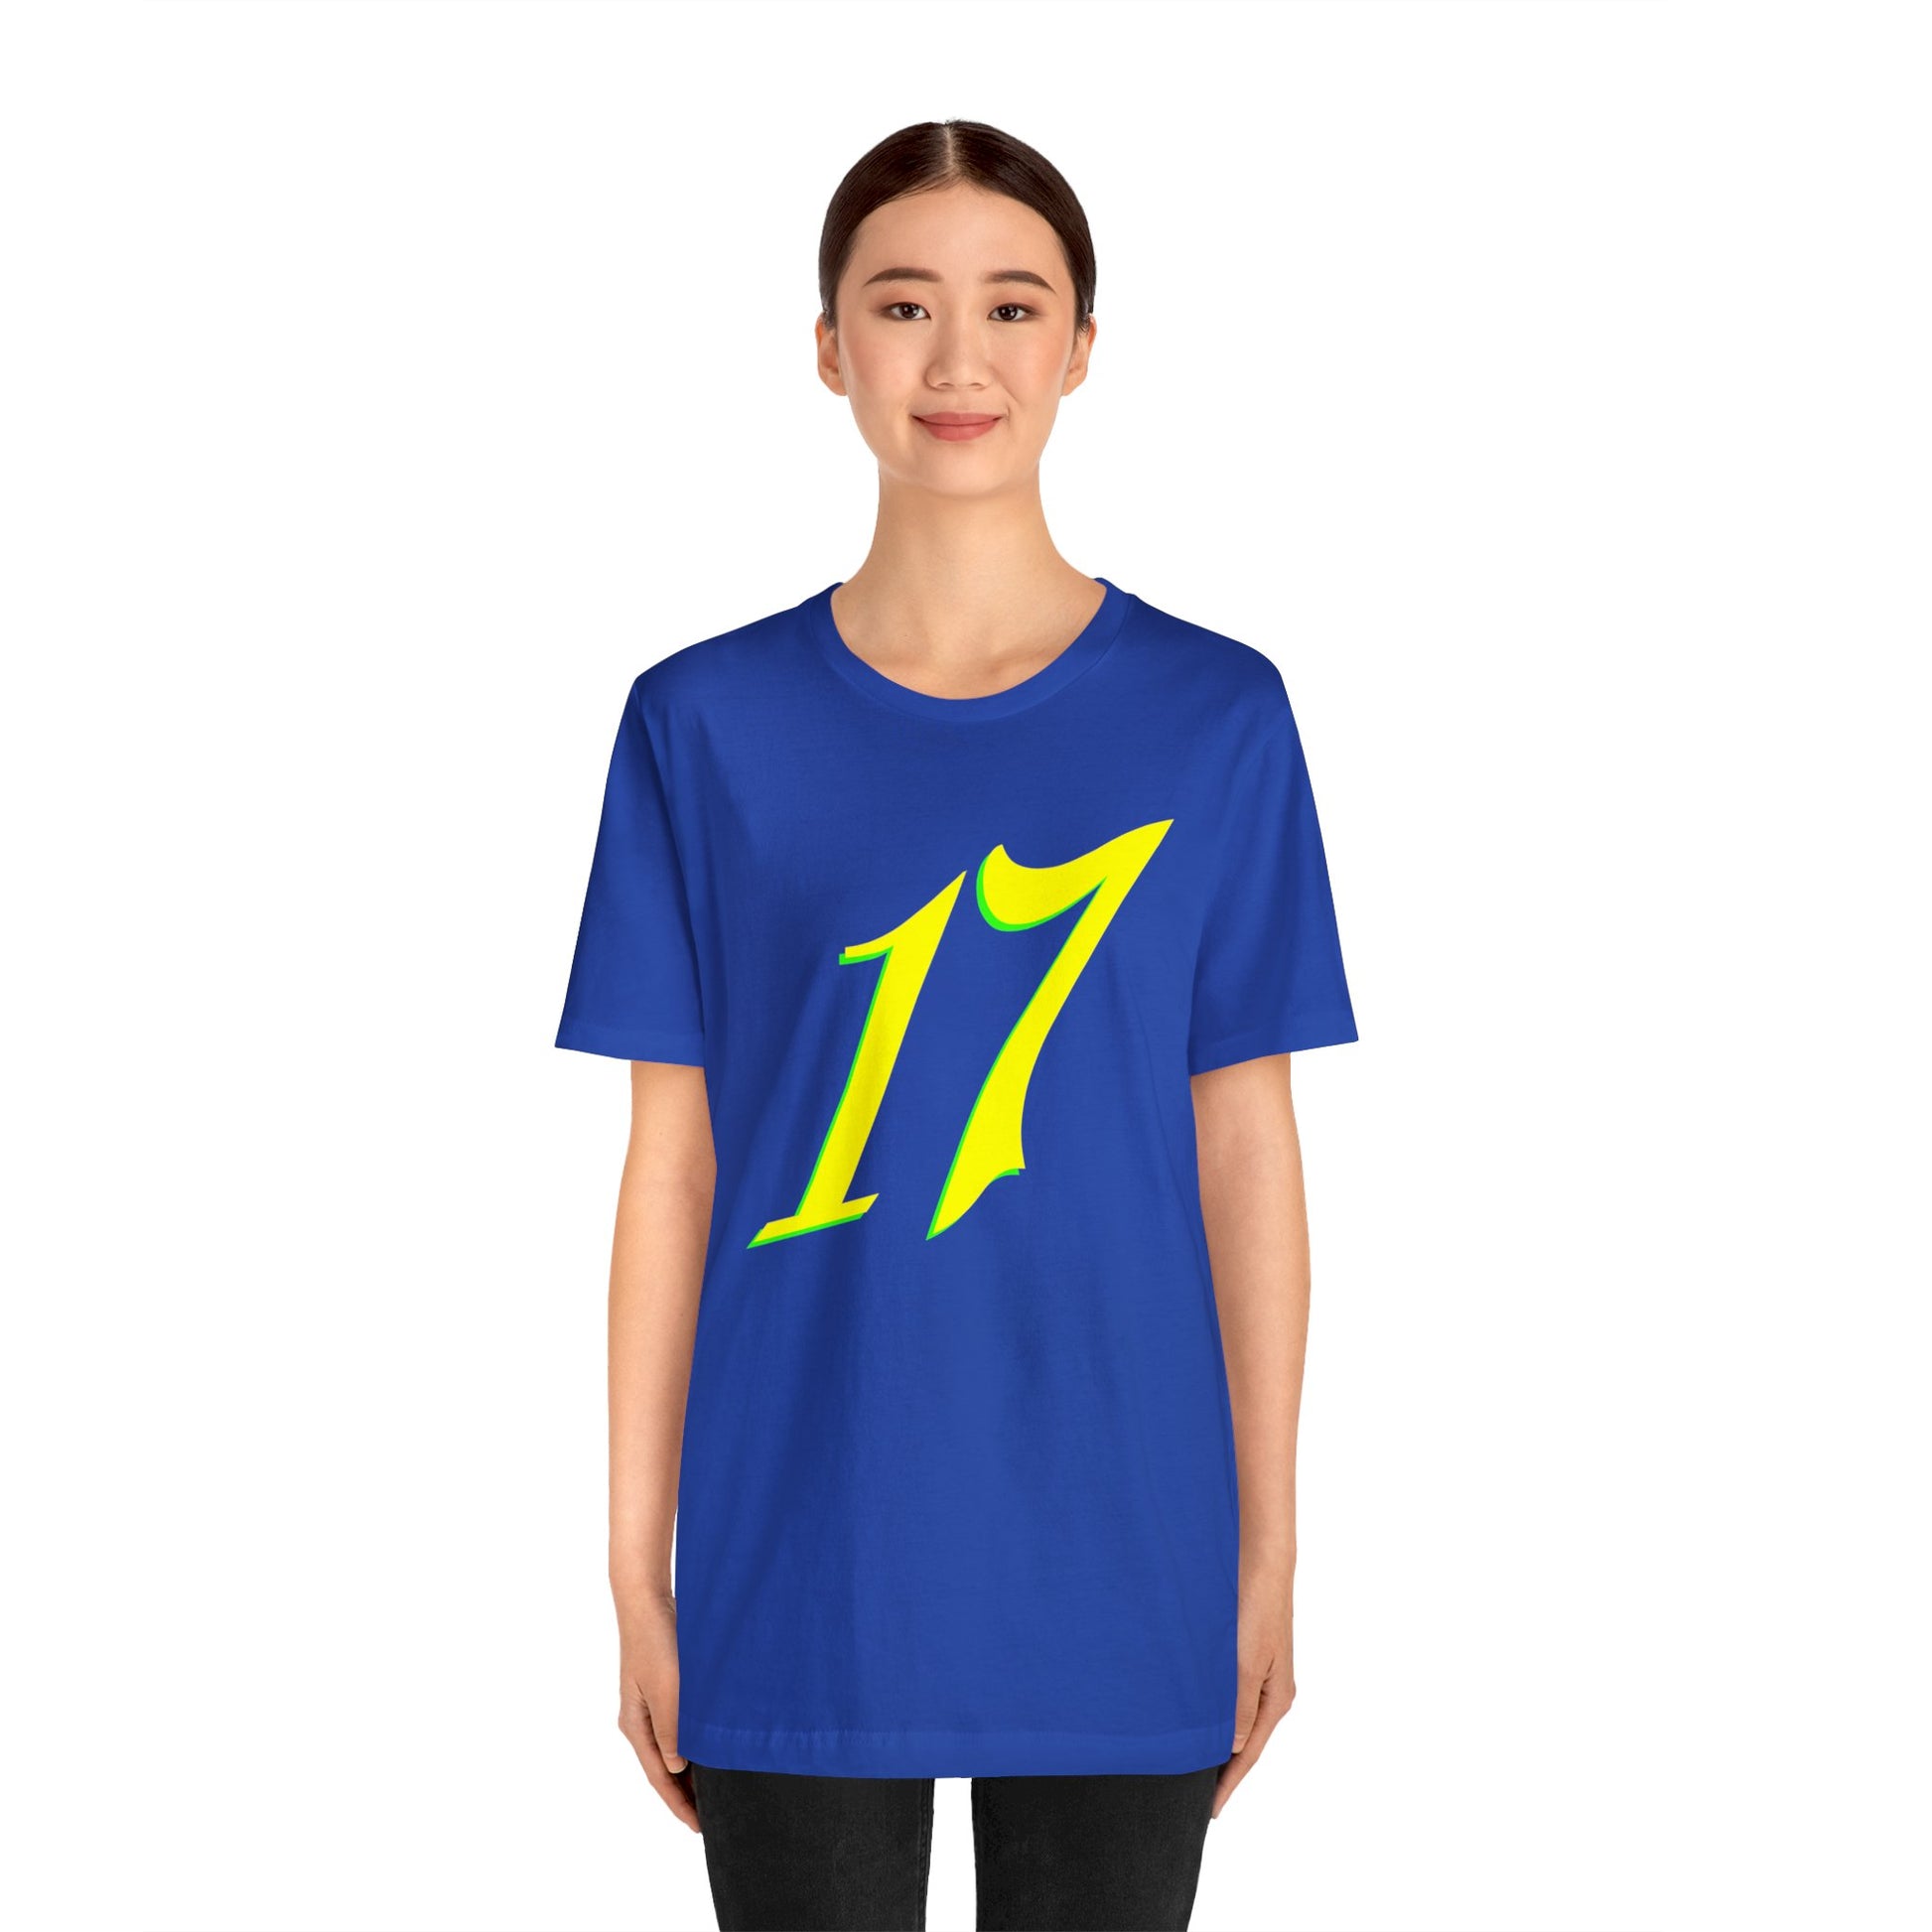 Number 17 Design - Soft Cotton Tee for birthdays and celebrations, Gift for friends and family, Multiple Options by clothezy.com in Asphalt Size Medium - Buy Now